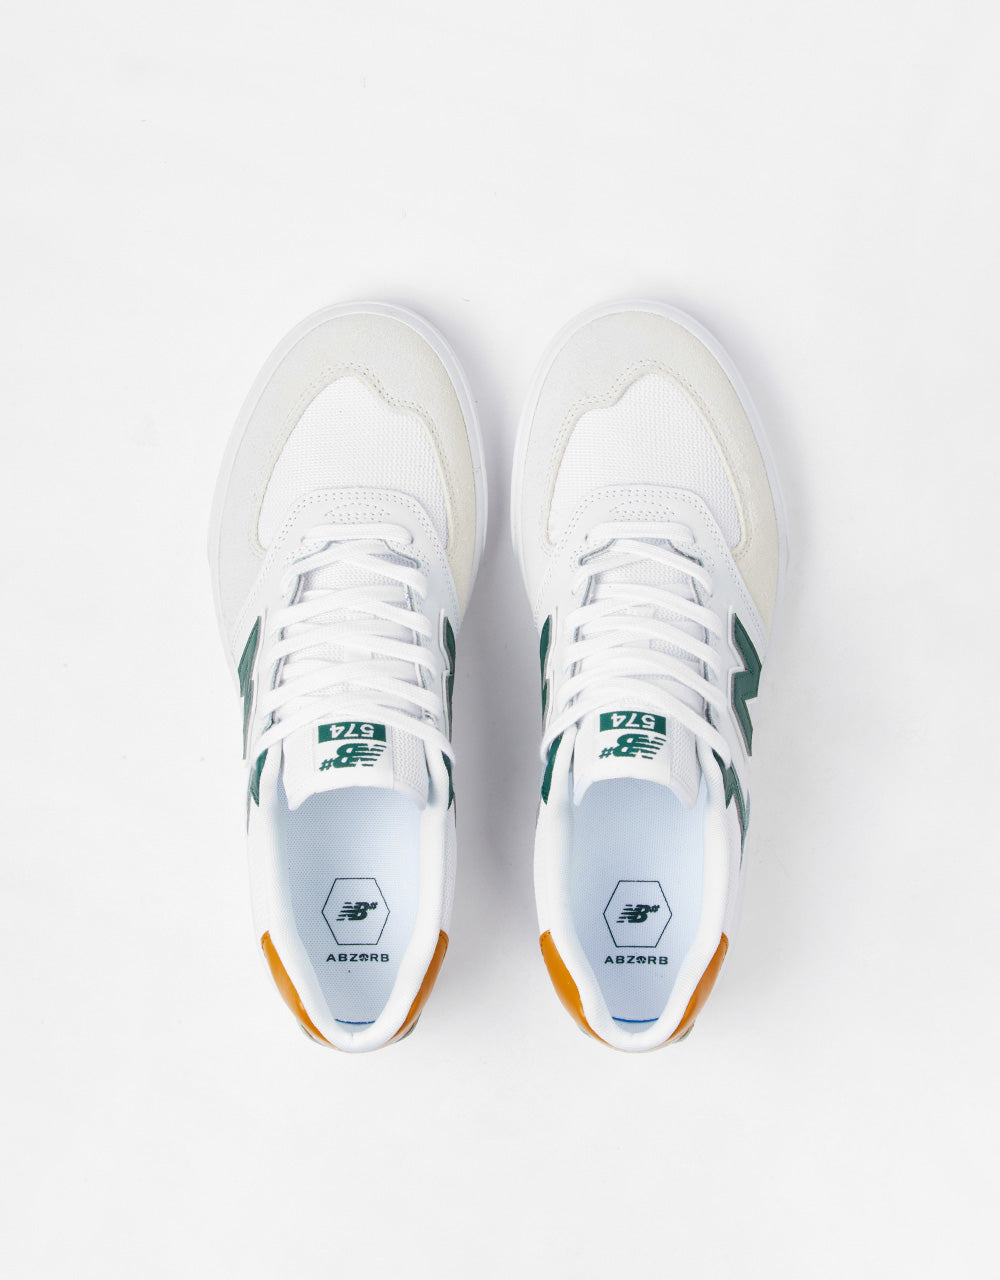 New Balance Numeric 574 Vulc Skate Shoes - White/Forest